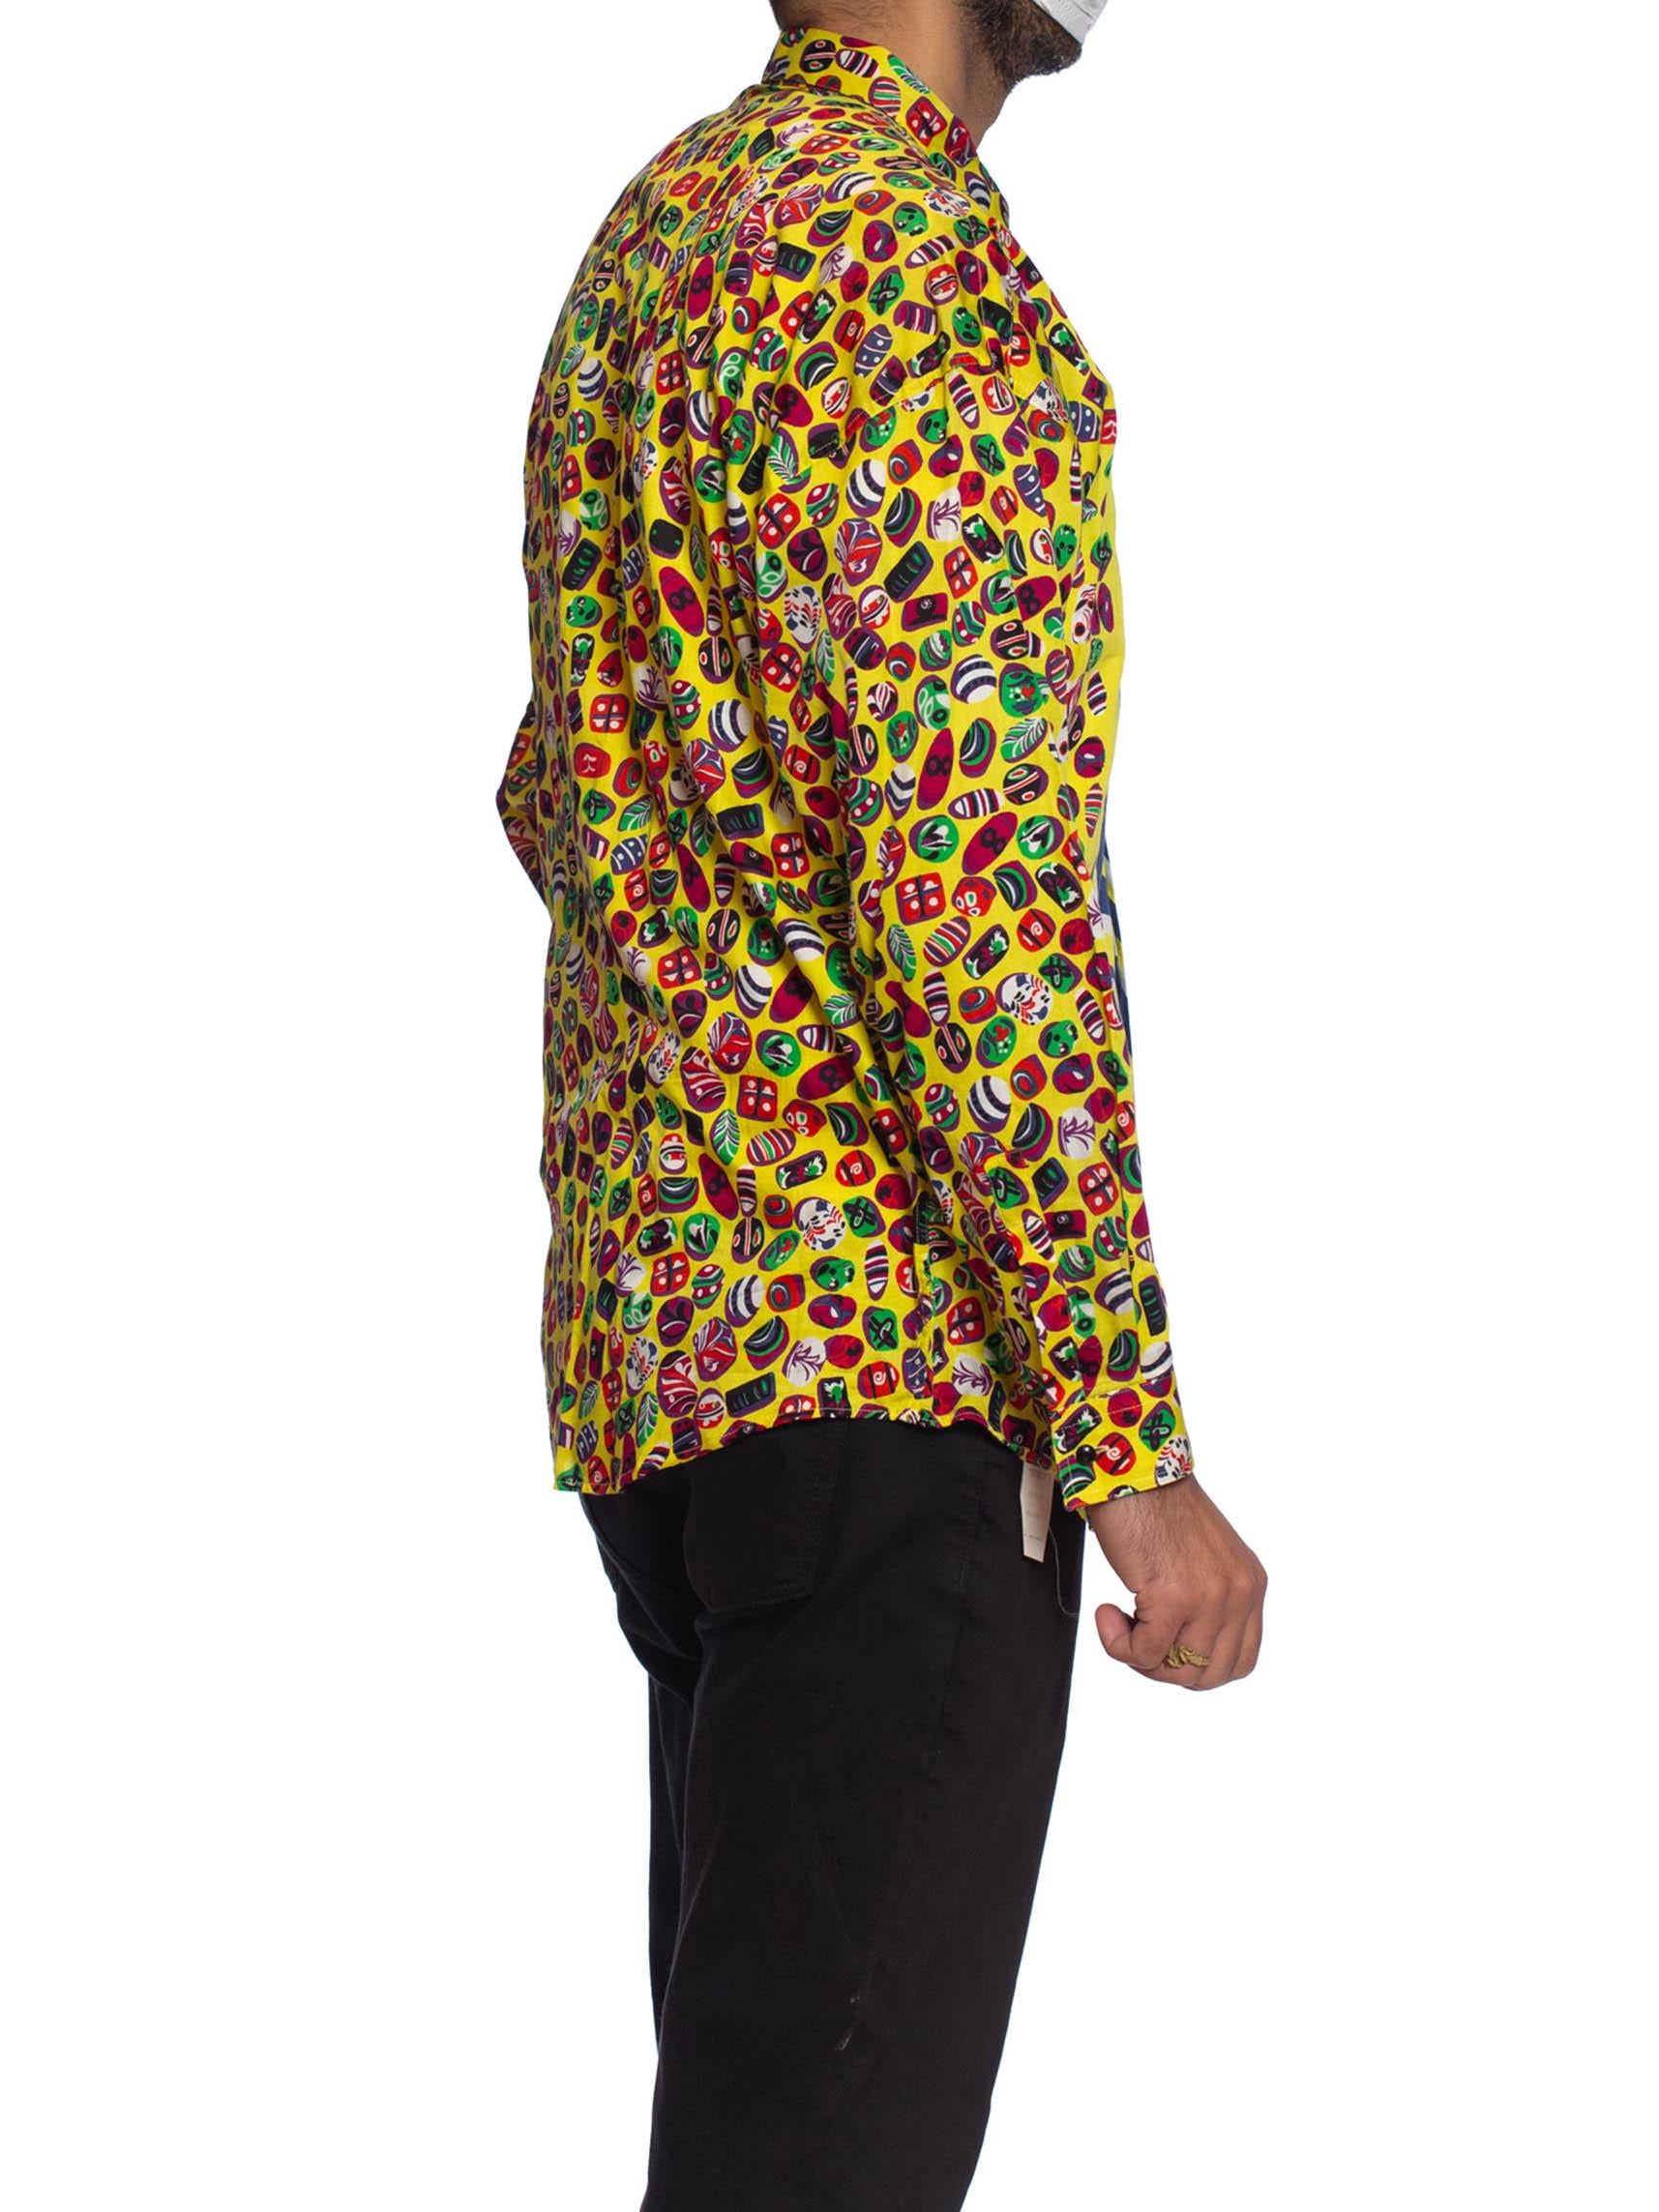 Yellow 1990S GIANNI VERSACE Printed Cotton Lawn Men's Shirt With Japanese Inspired Prin For Sale